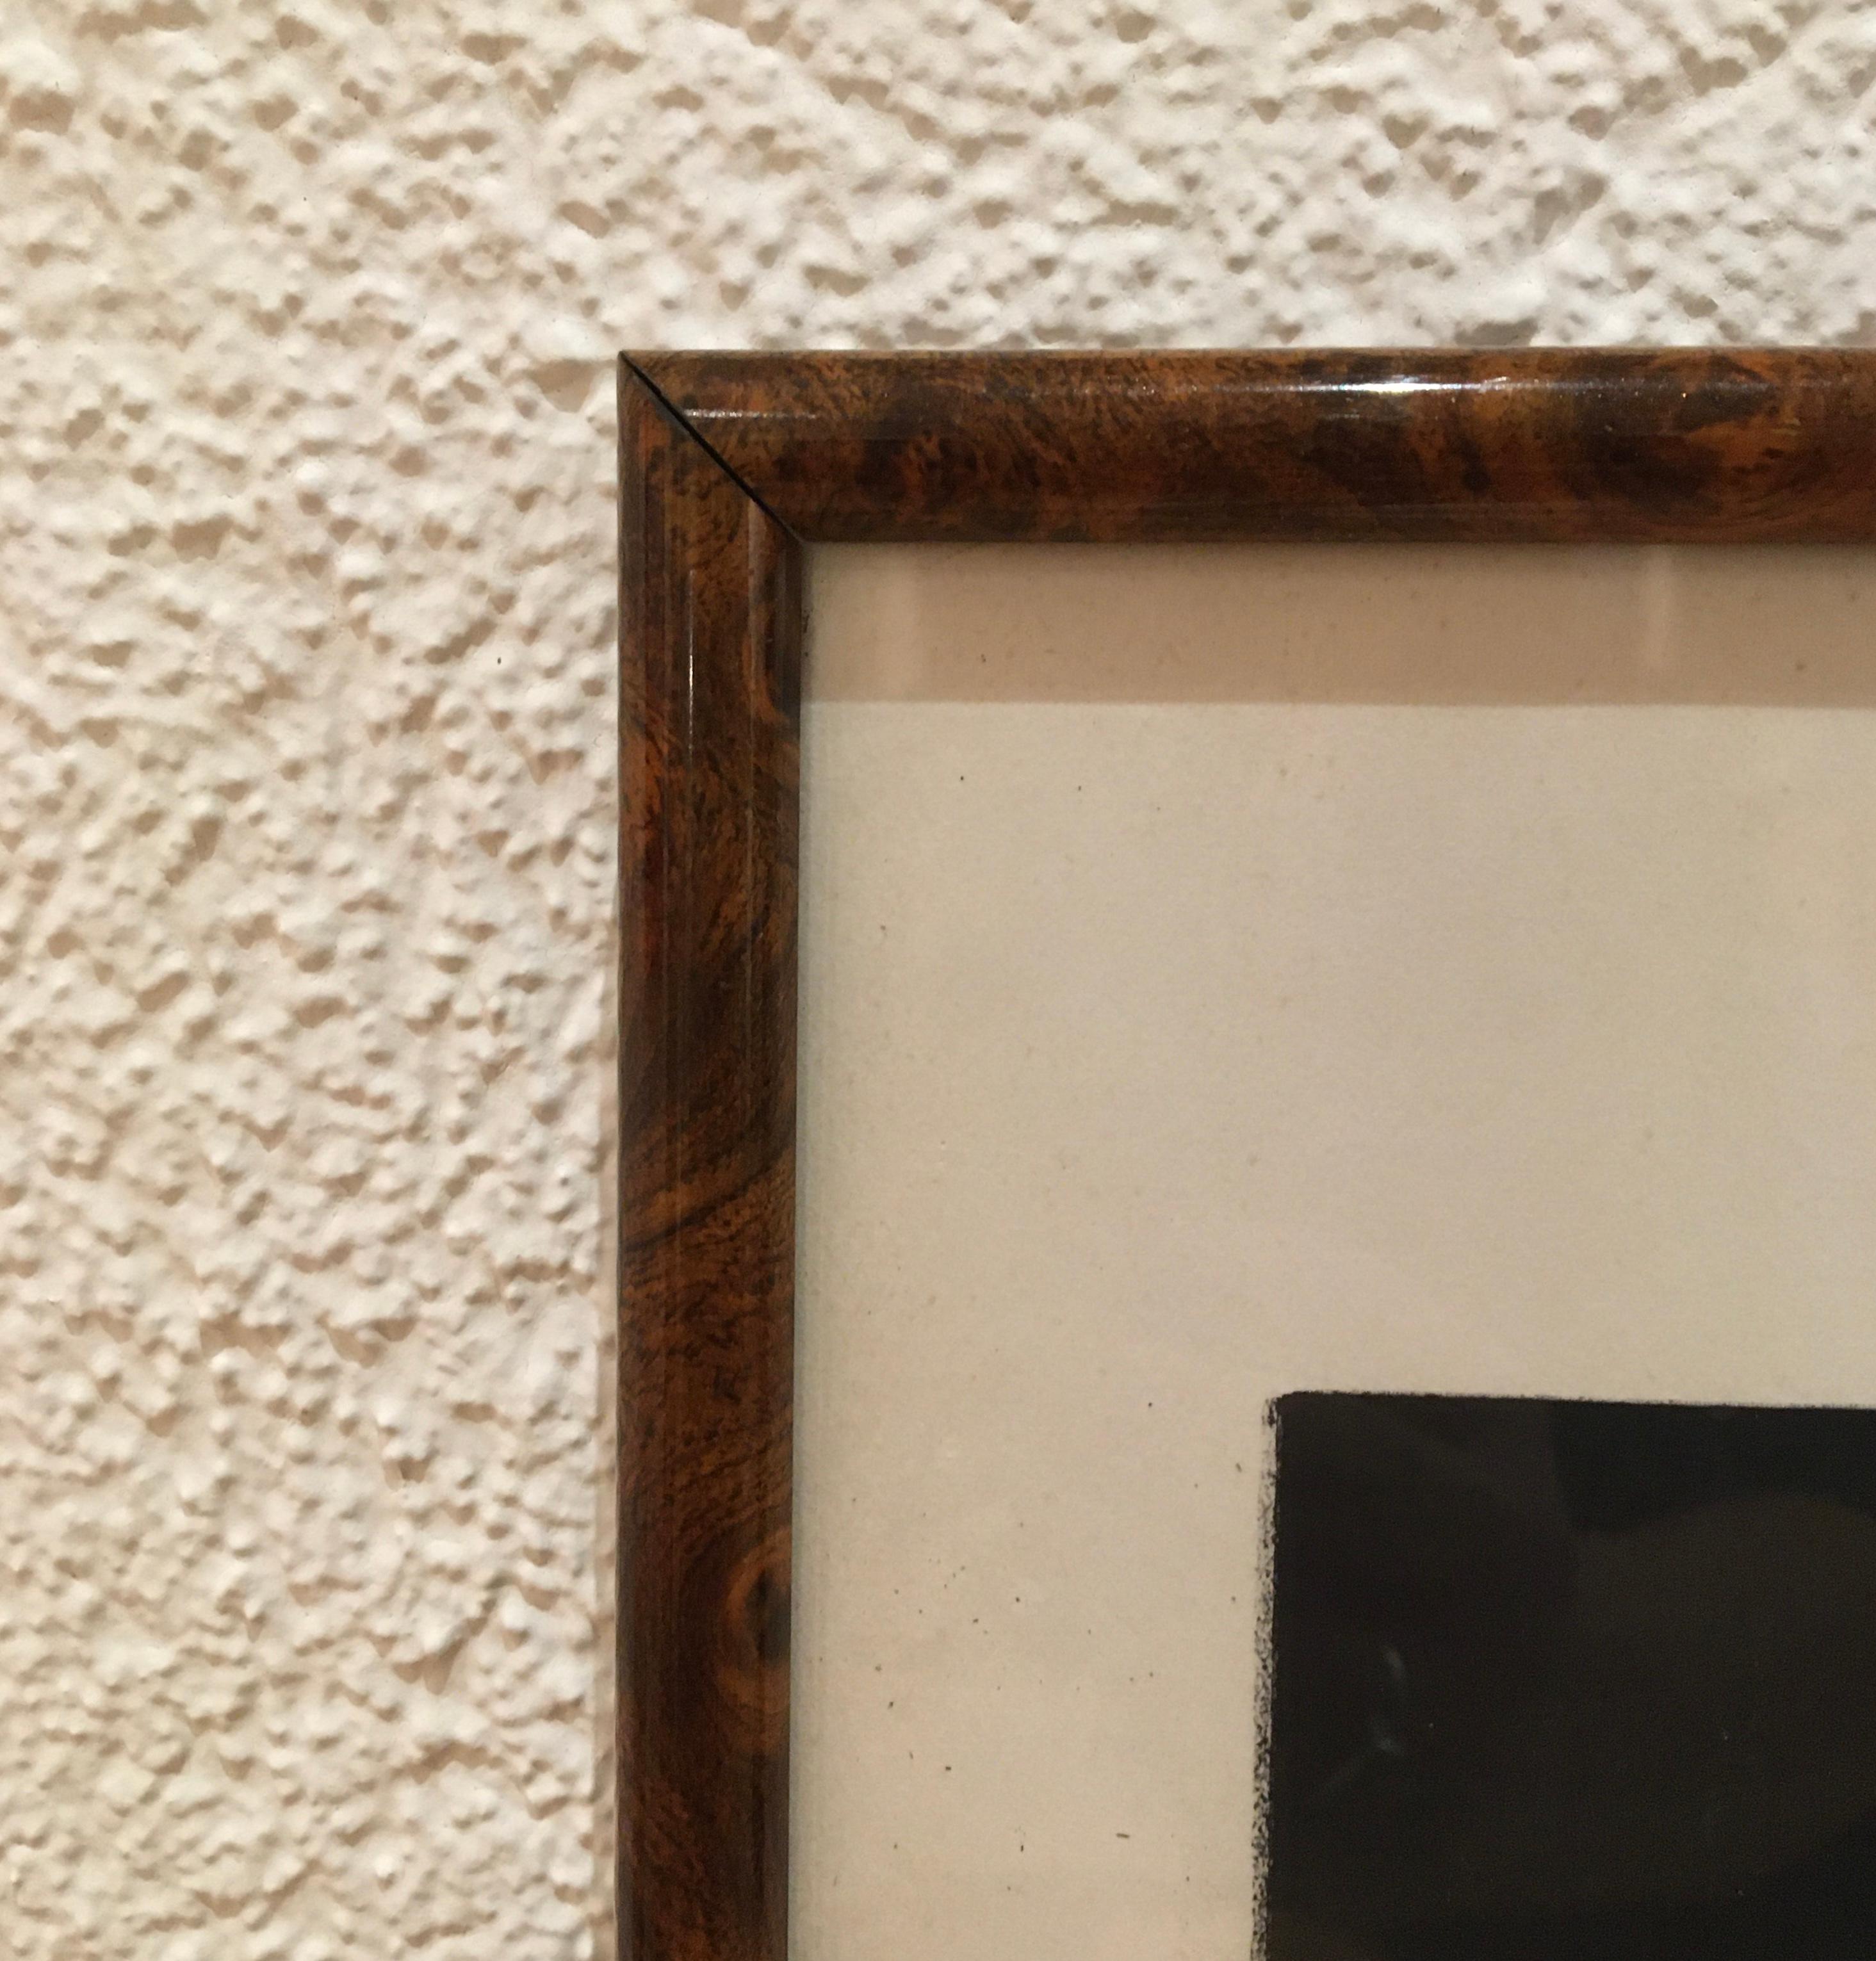 Ed : 15/15
Work on paper
Brown wooden frame with glass pane
72 x 57 x 2.5 cm